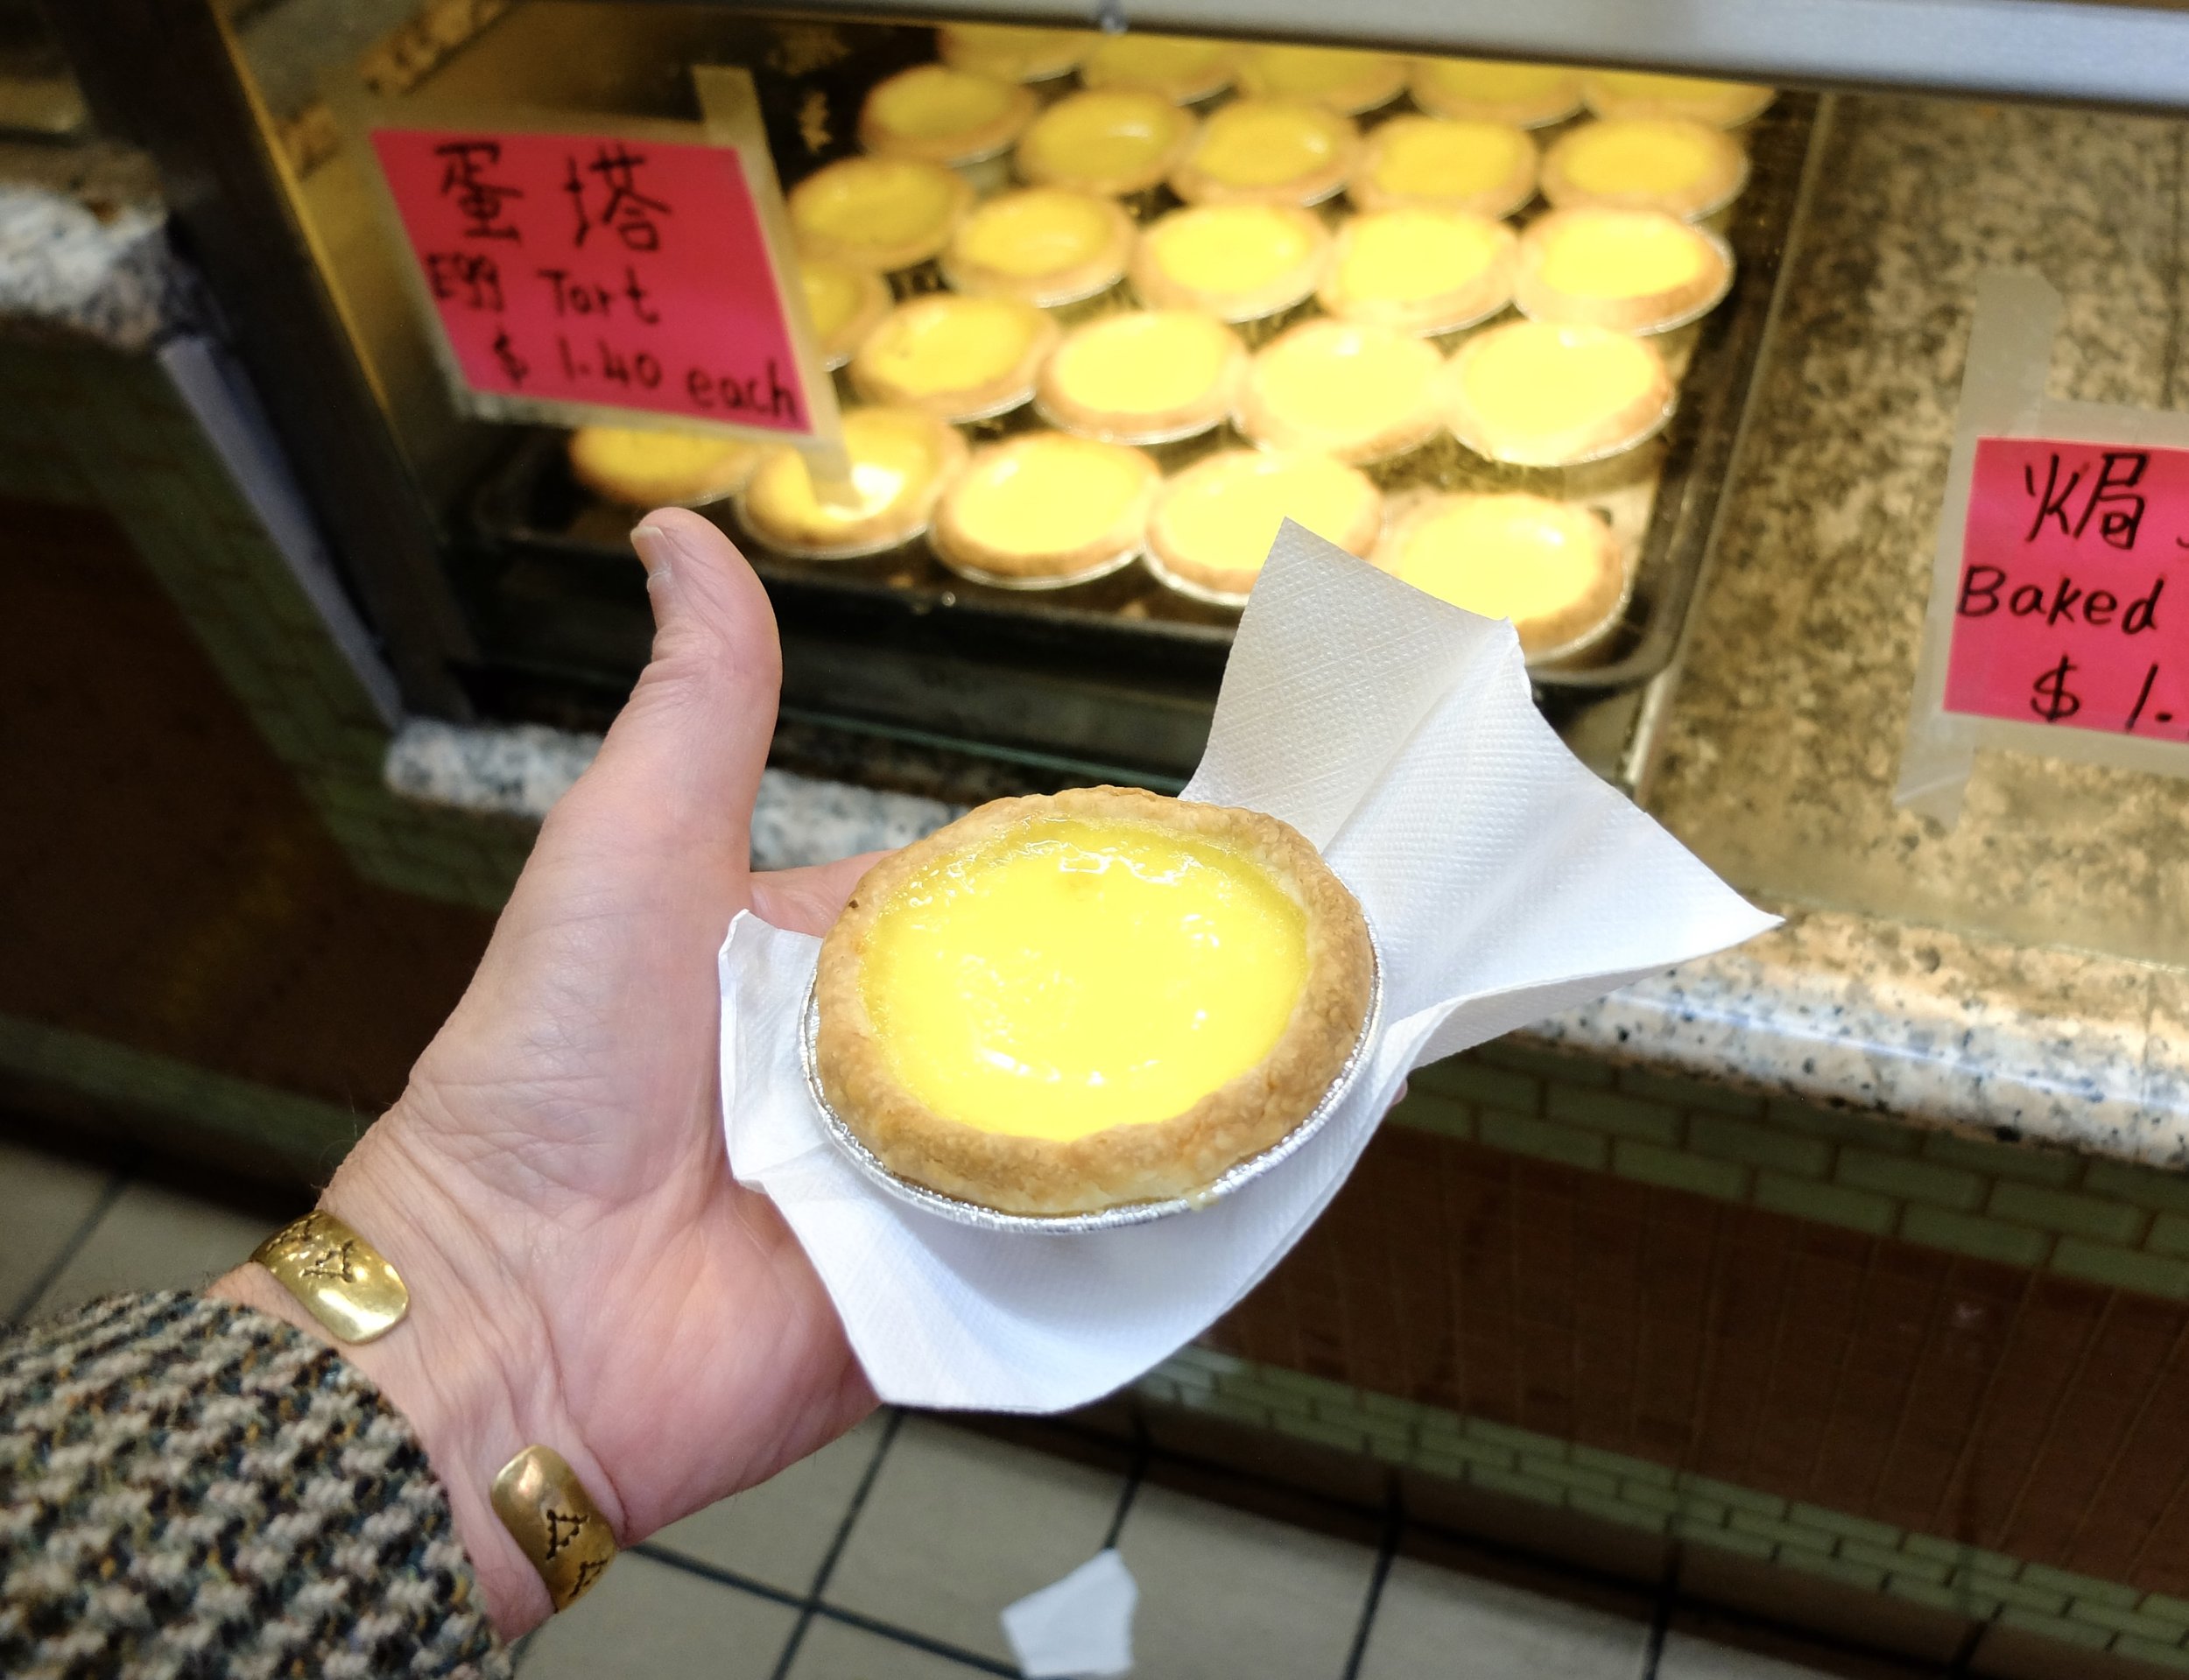 I walked out of an alley &amp; across the street was a small bakery.  I spied a tray filled with custard tarts still warm from the oven.  So very good.